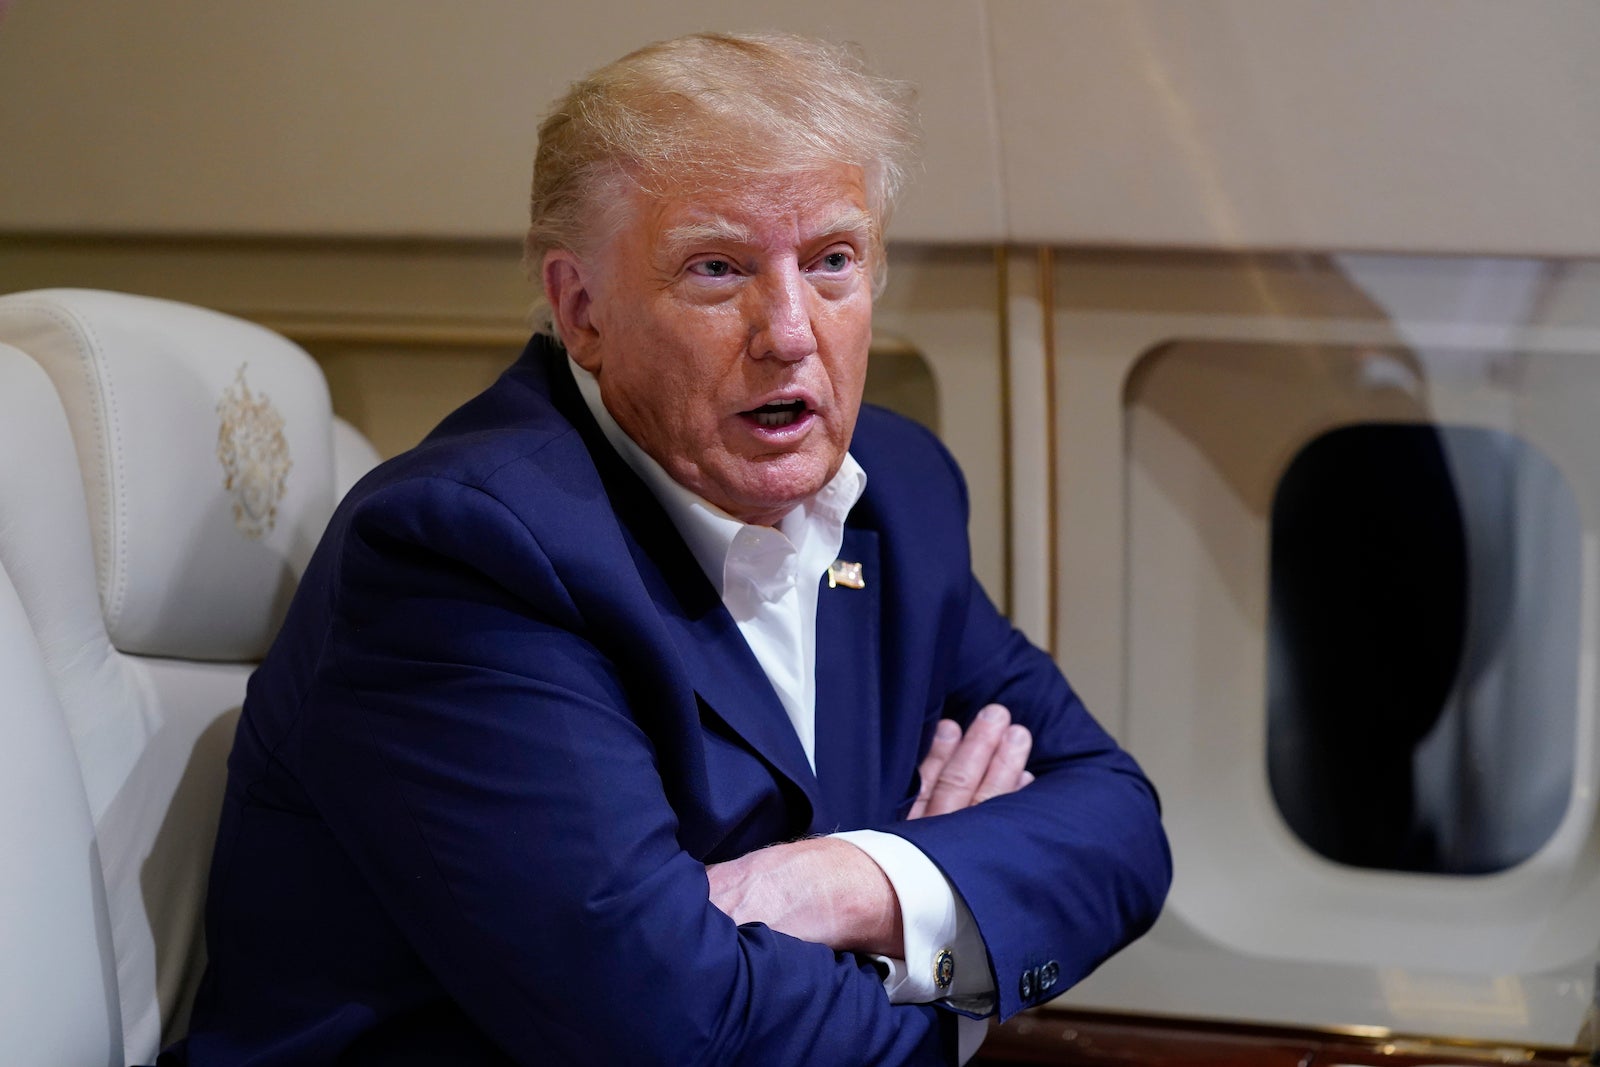 Former President Donald Trump speaks with reporters while in flight